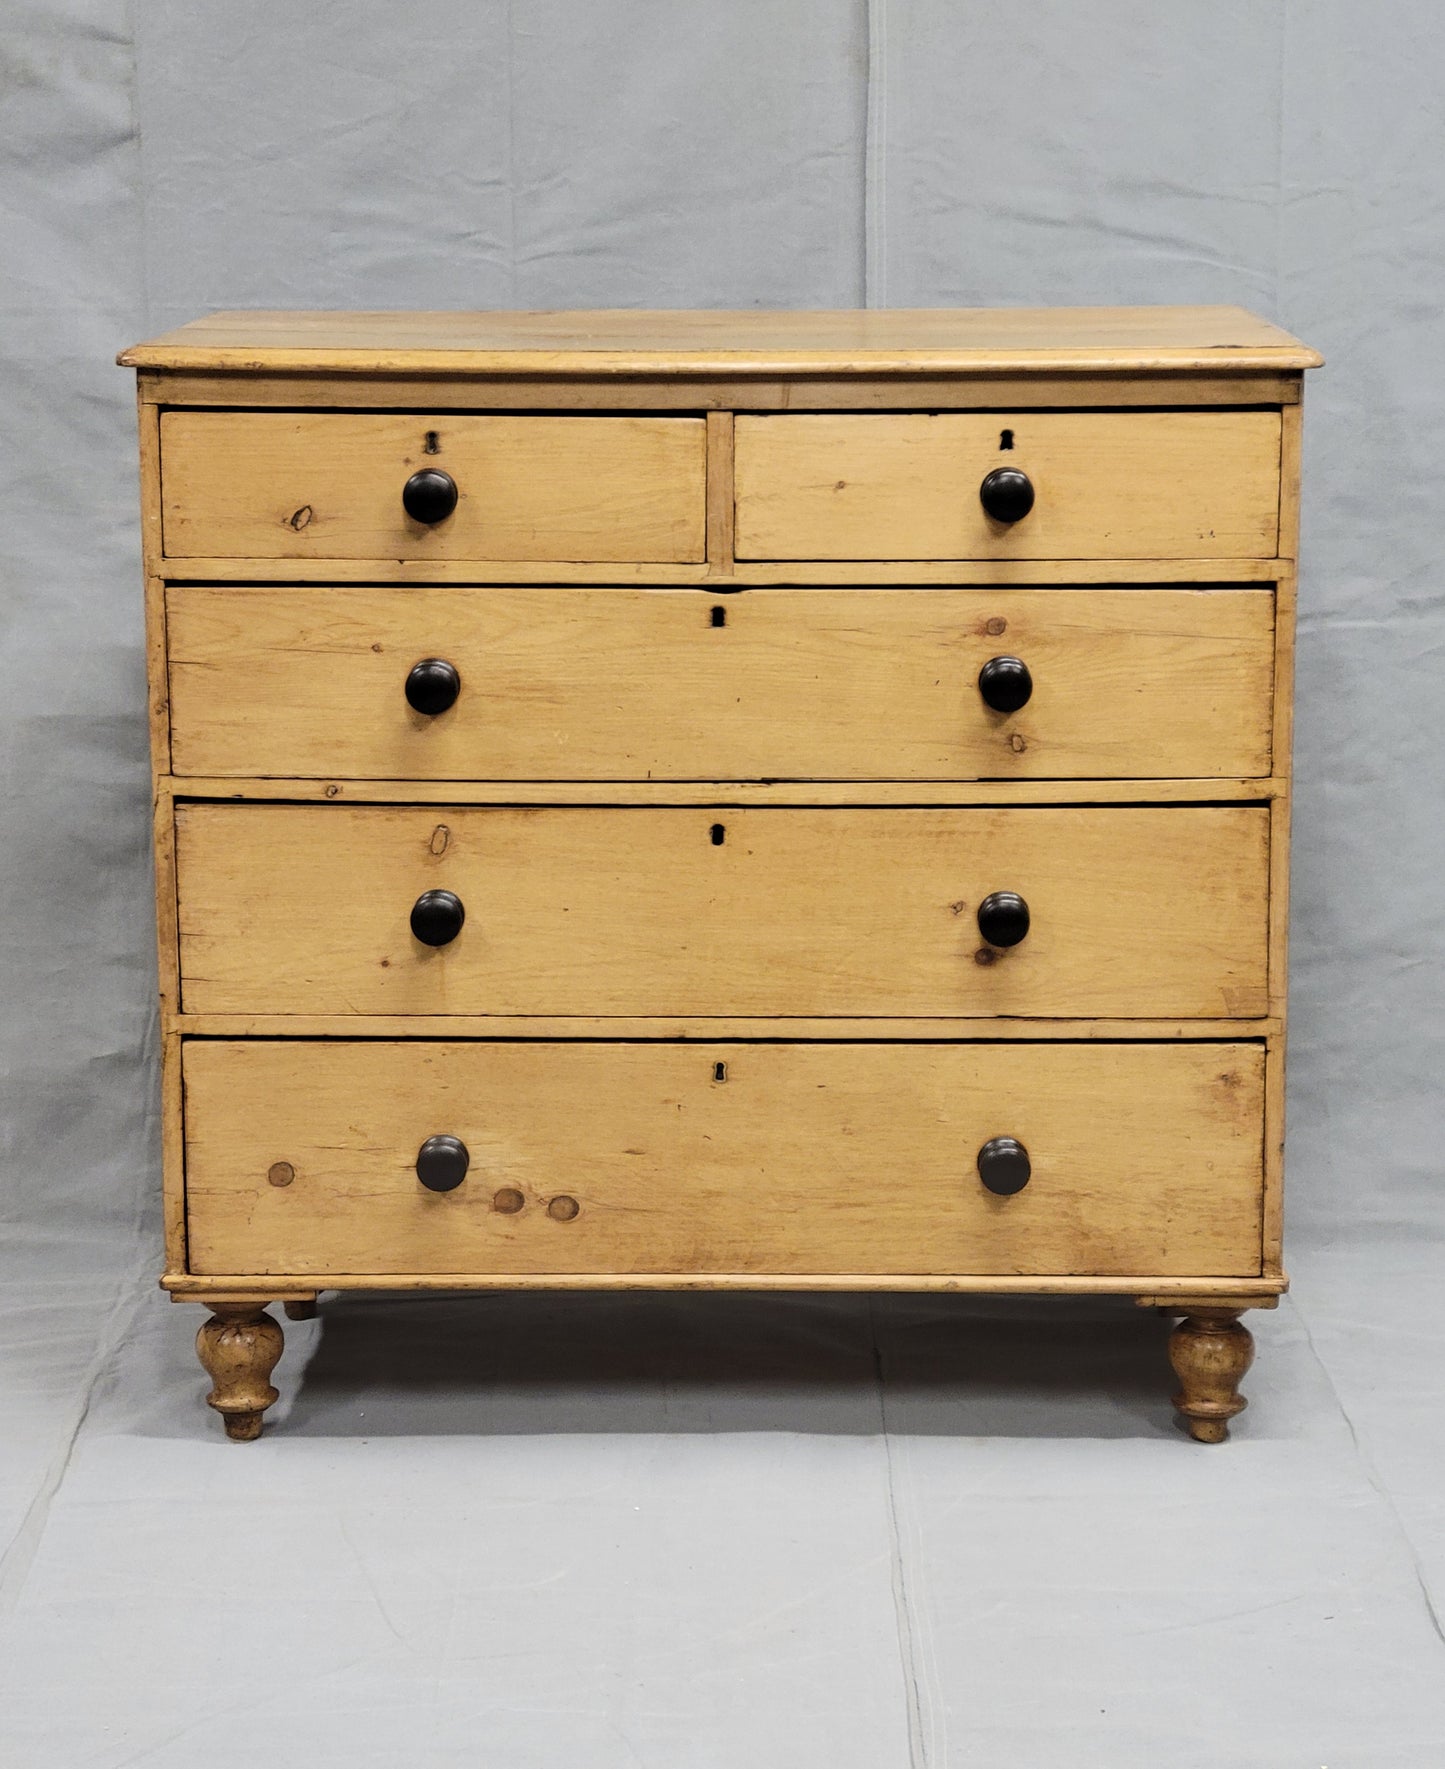 Antique English Edwardian Circa 1900 Scrubbed Pine Dresser Chest of Drawers With Turnip Feet